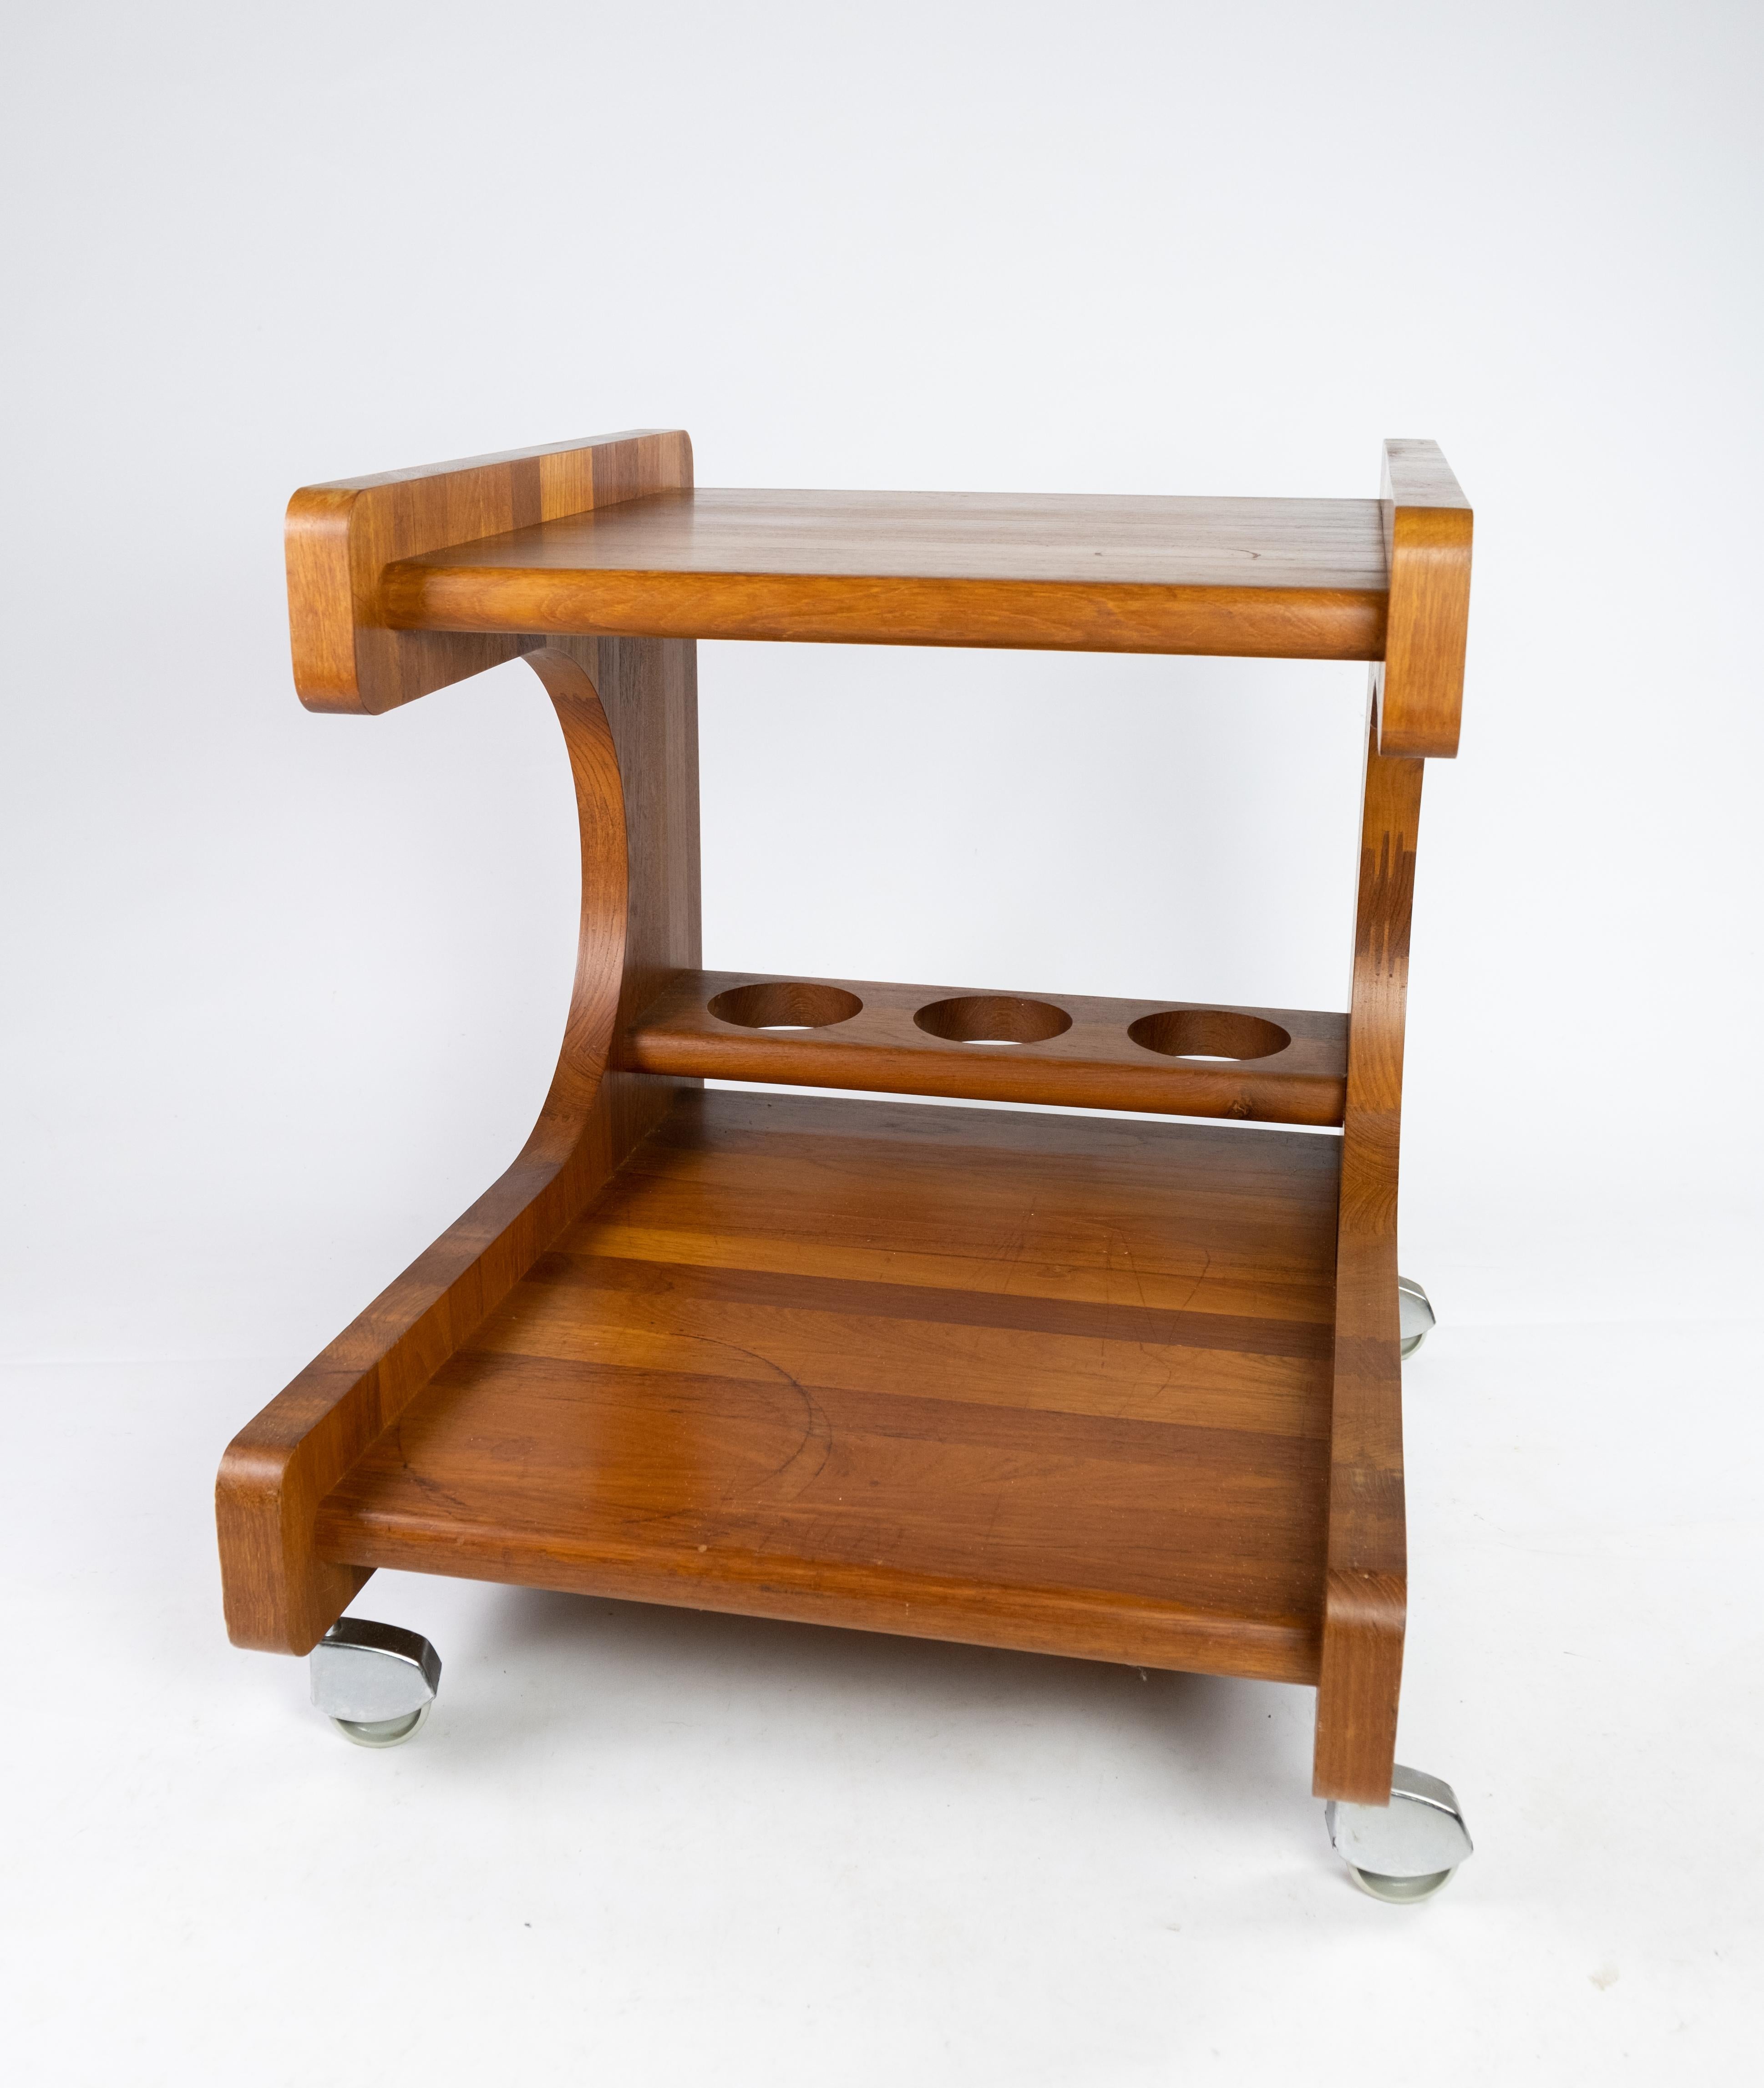 Smaller tray table or bar cart in teak of Danish design from the 1960s. The table is in great vintage condition.